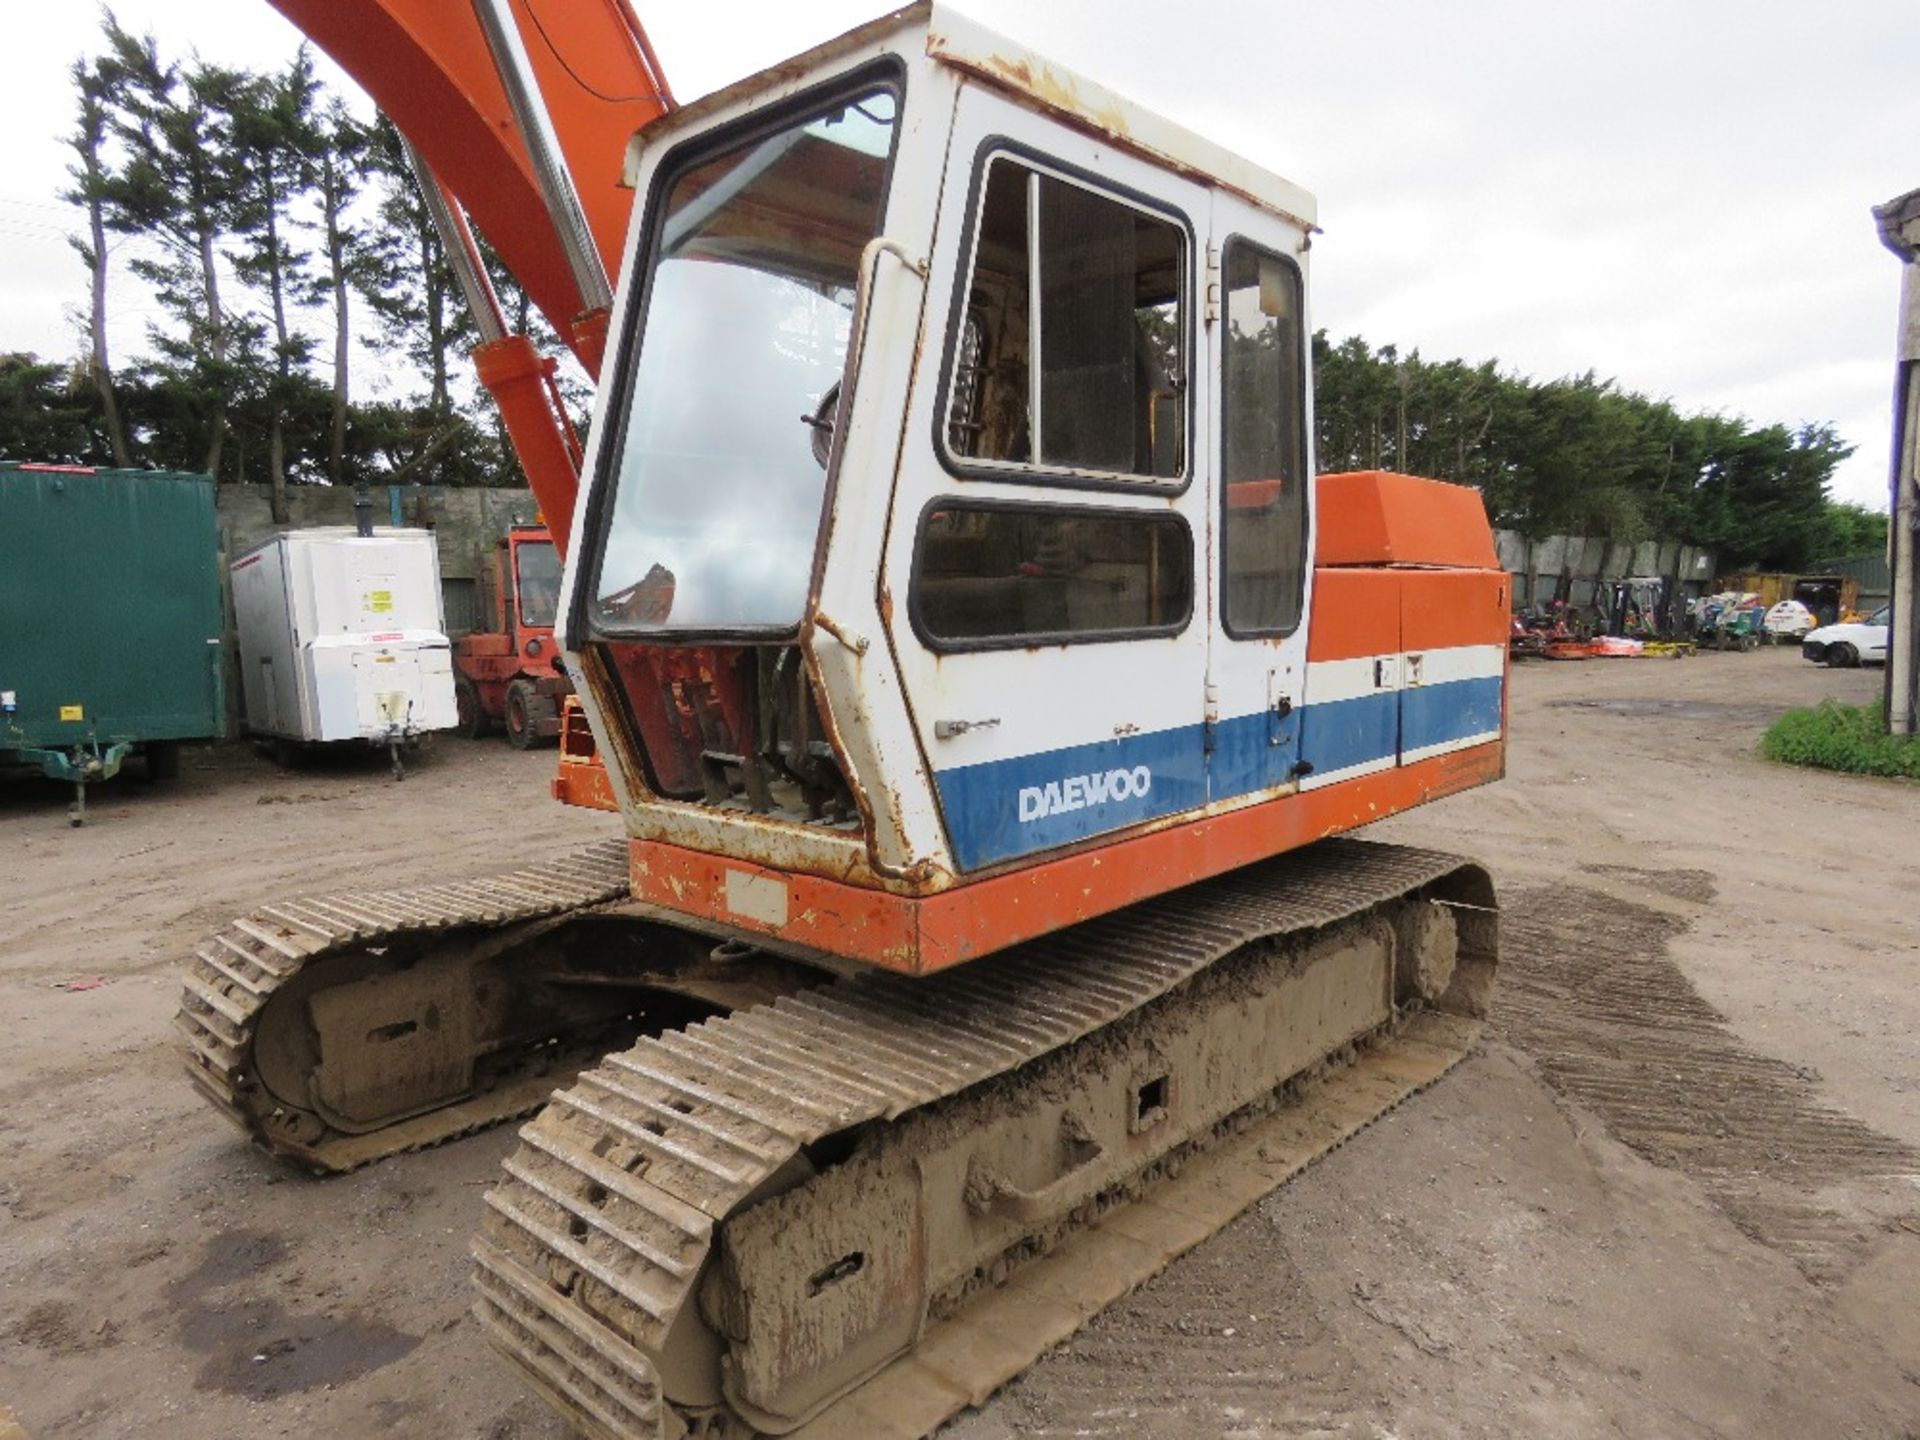 DAEWOO DH130 STEEL TRACKED EXCAVATOR, 13 TONNE RATED, SUPPLIED WITH 2 BUCKETS (6FT AND 3FT). SN:010 - Image 3 of 11